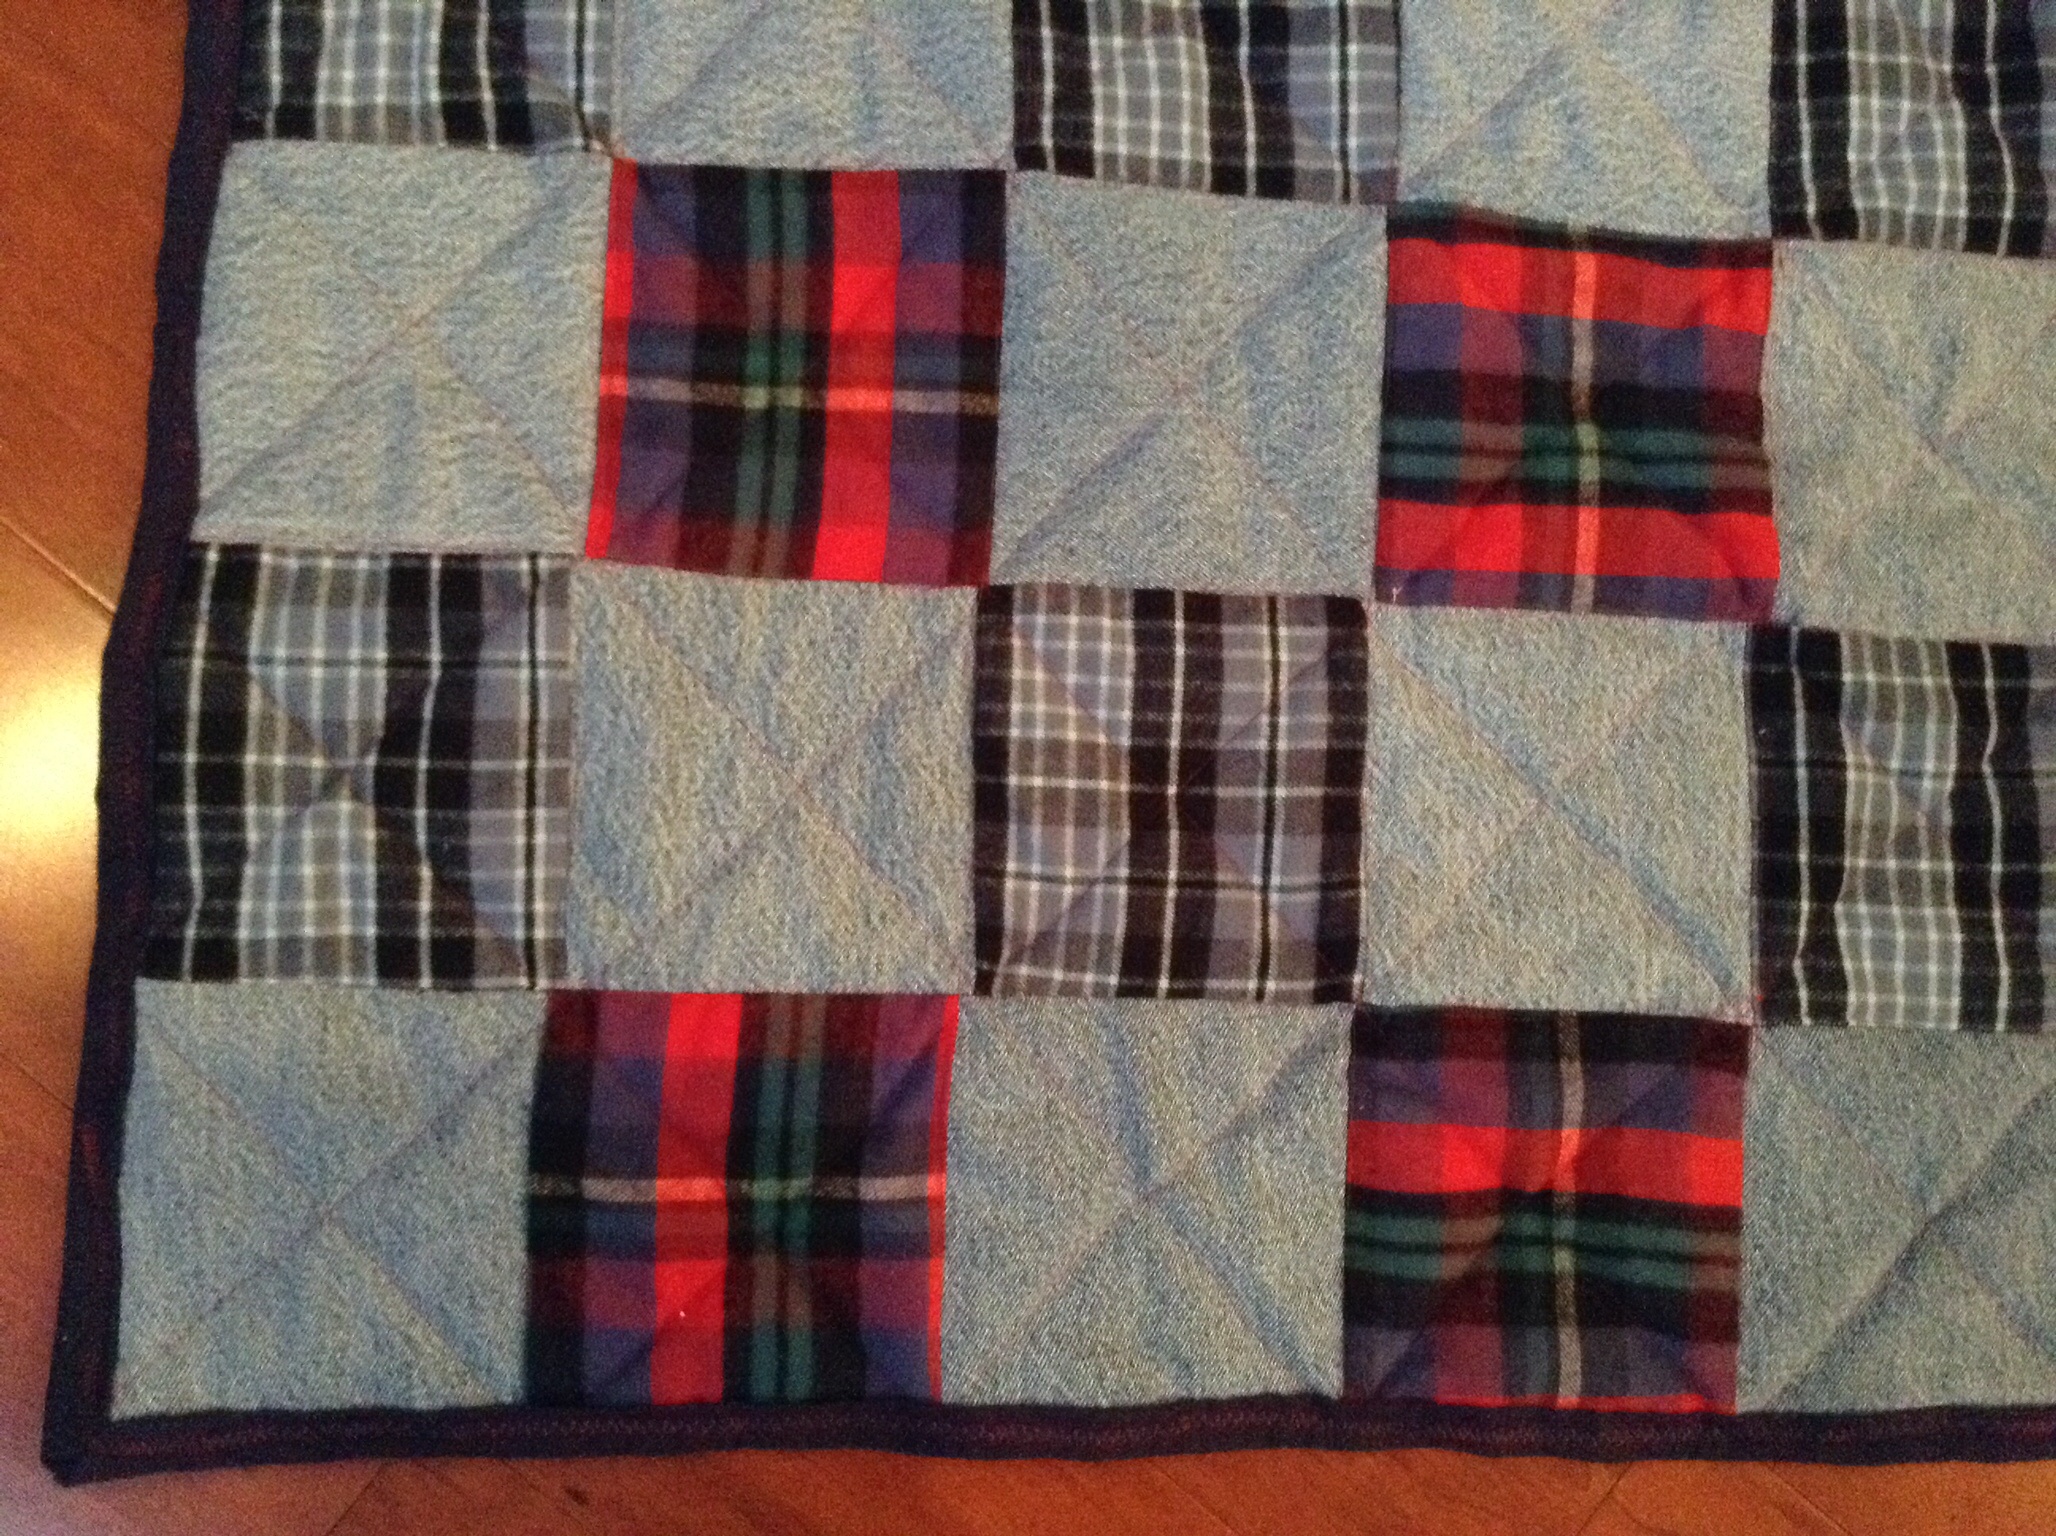 Denim and flannel quilt - Quiltingboard Forums